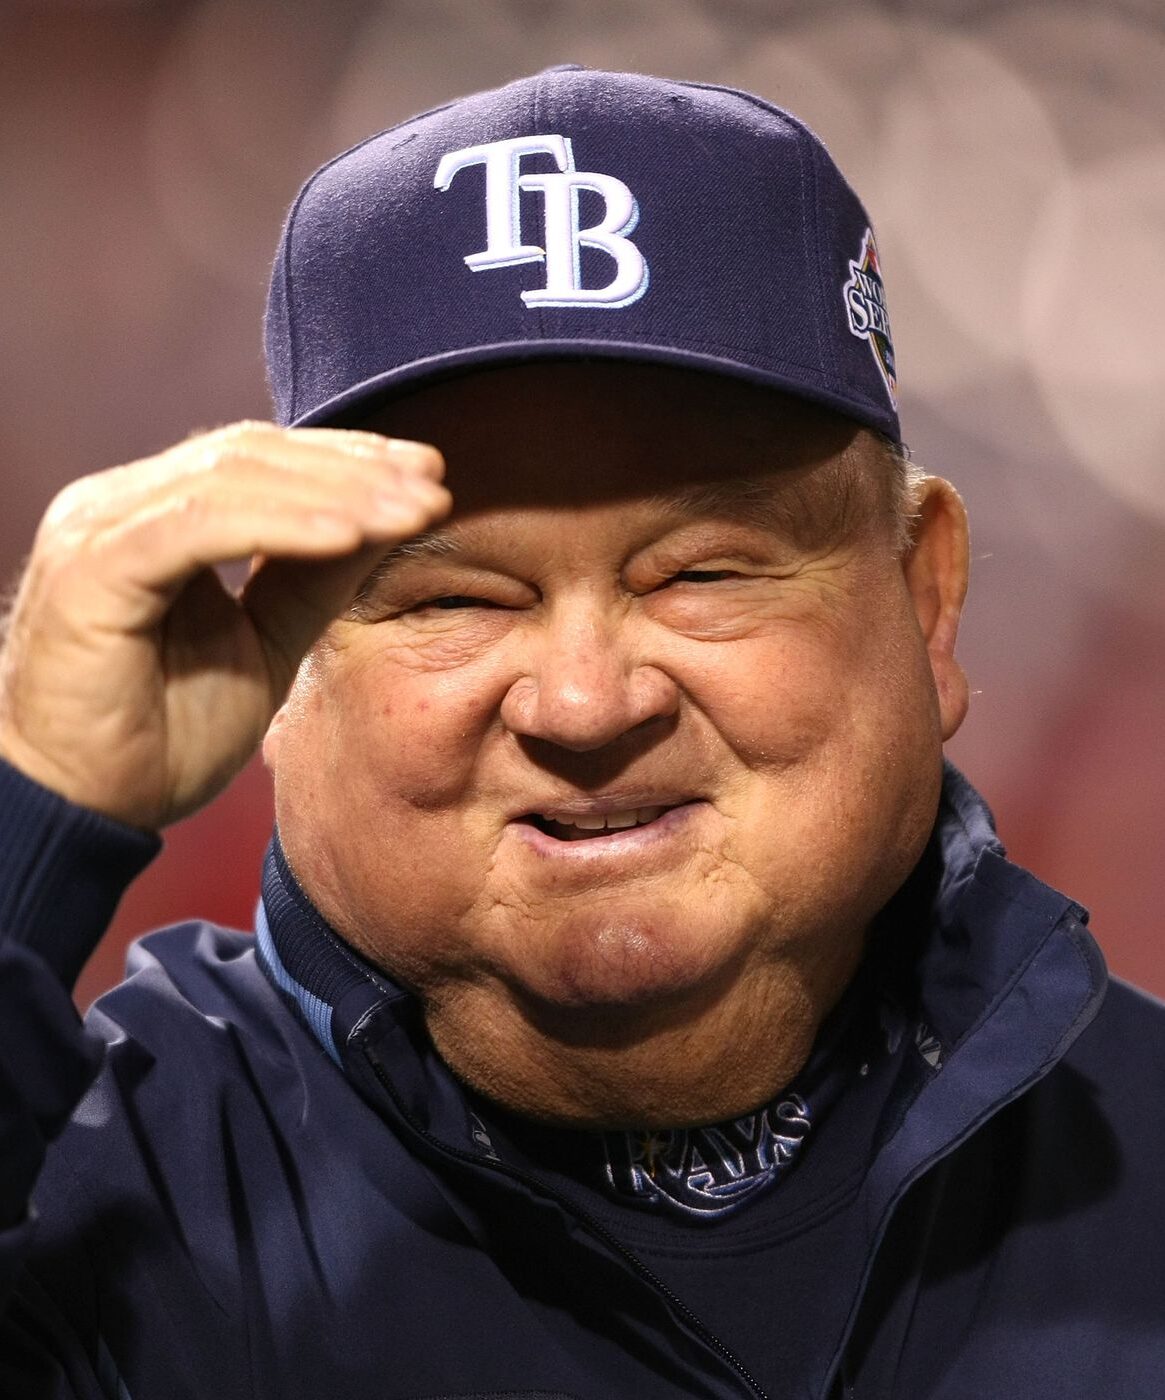 Rays Hall of Fame, Don Zimmer